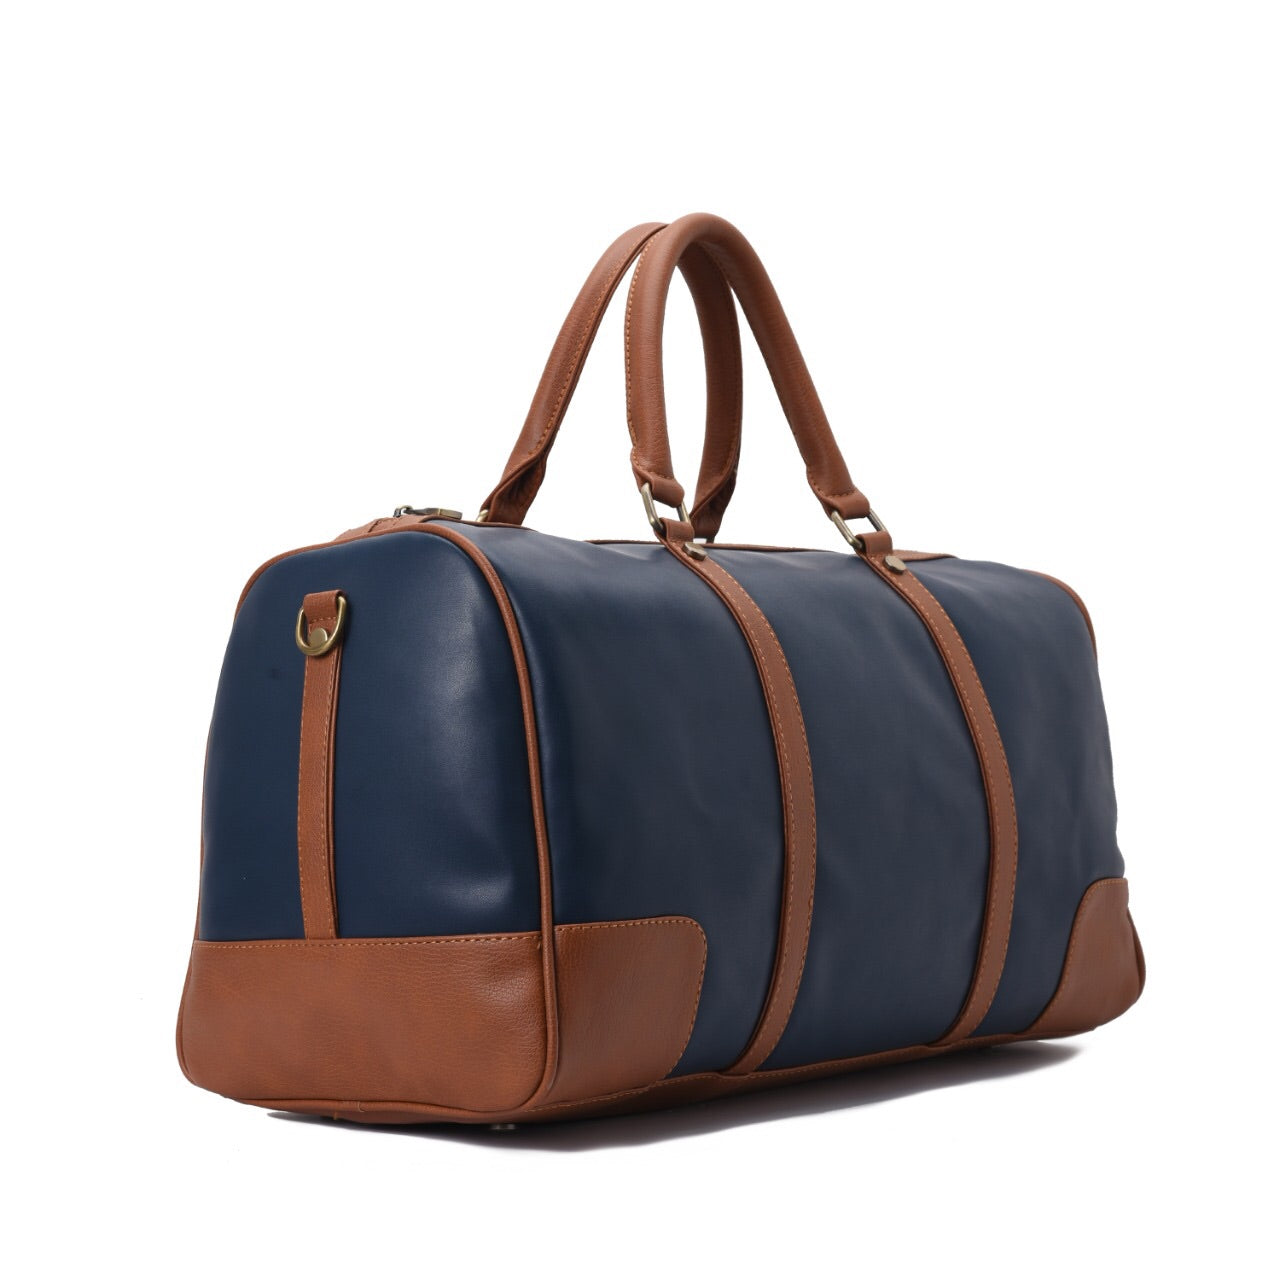 Duffle Bag Leather Navy and Brown